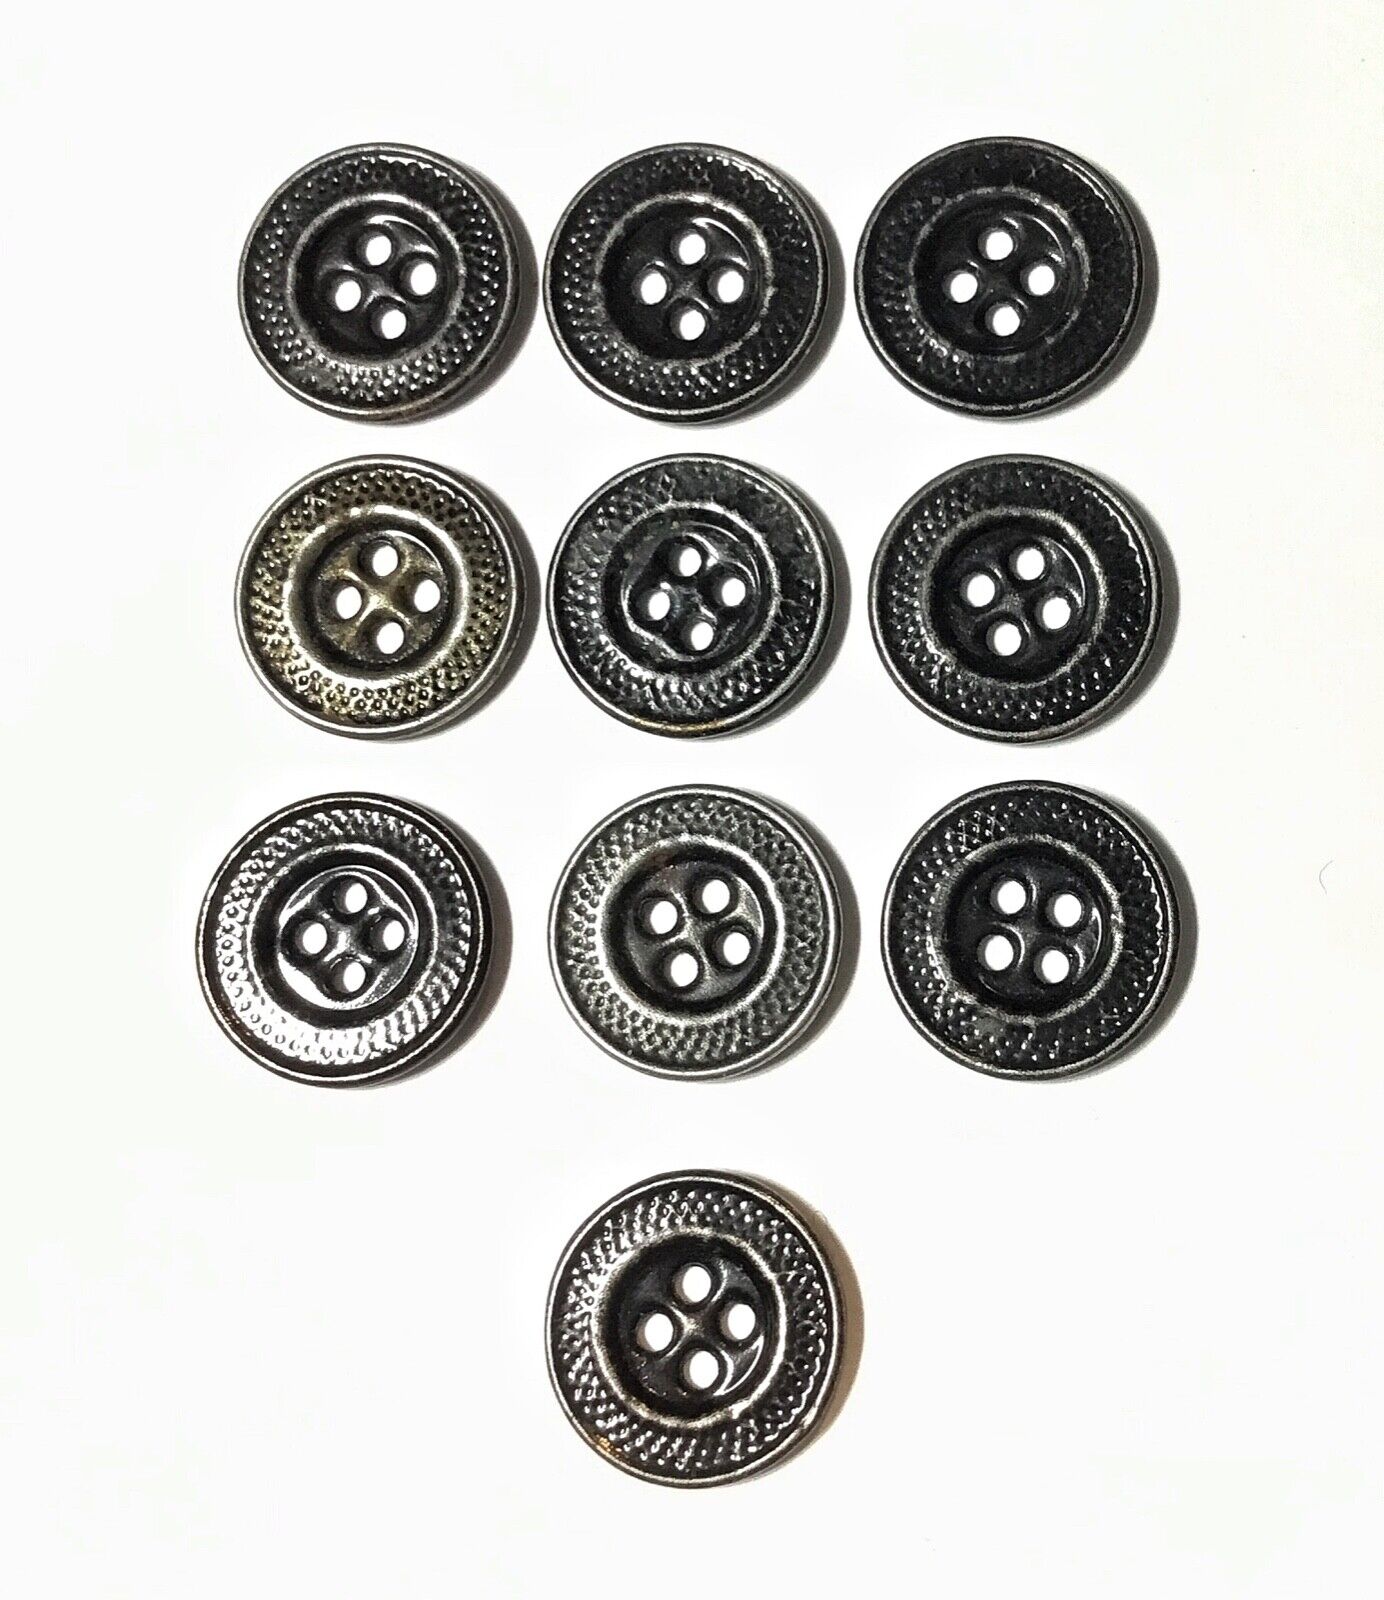 Set of 10 Old Painted Black Flat Metal Buttons